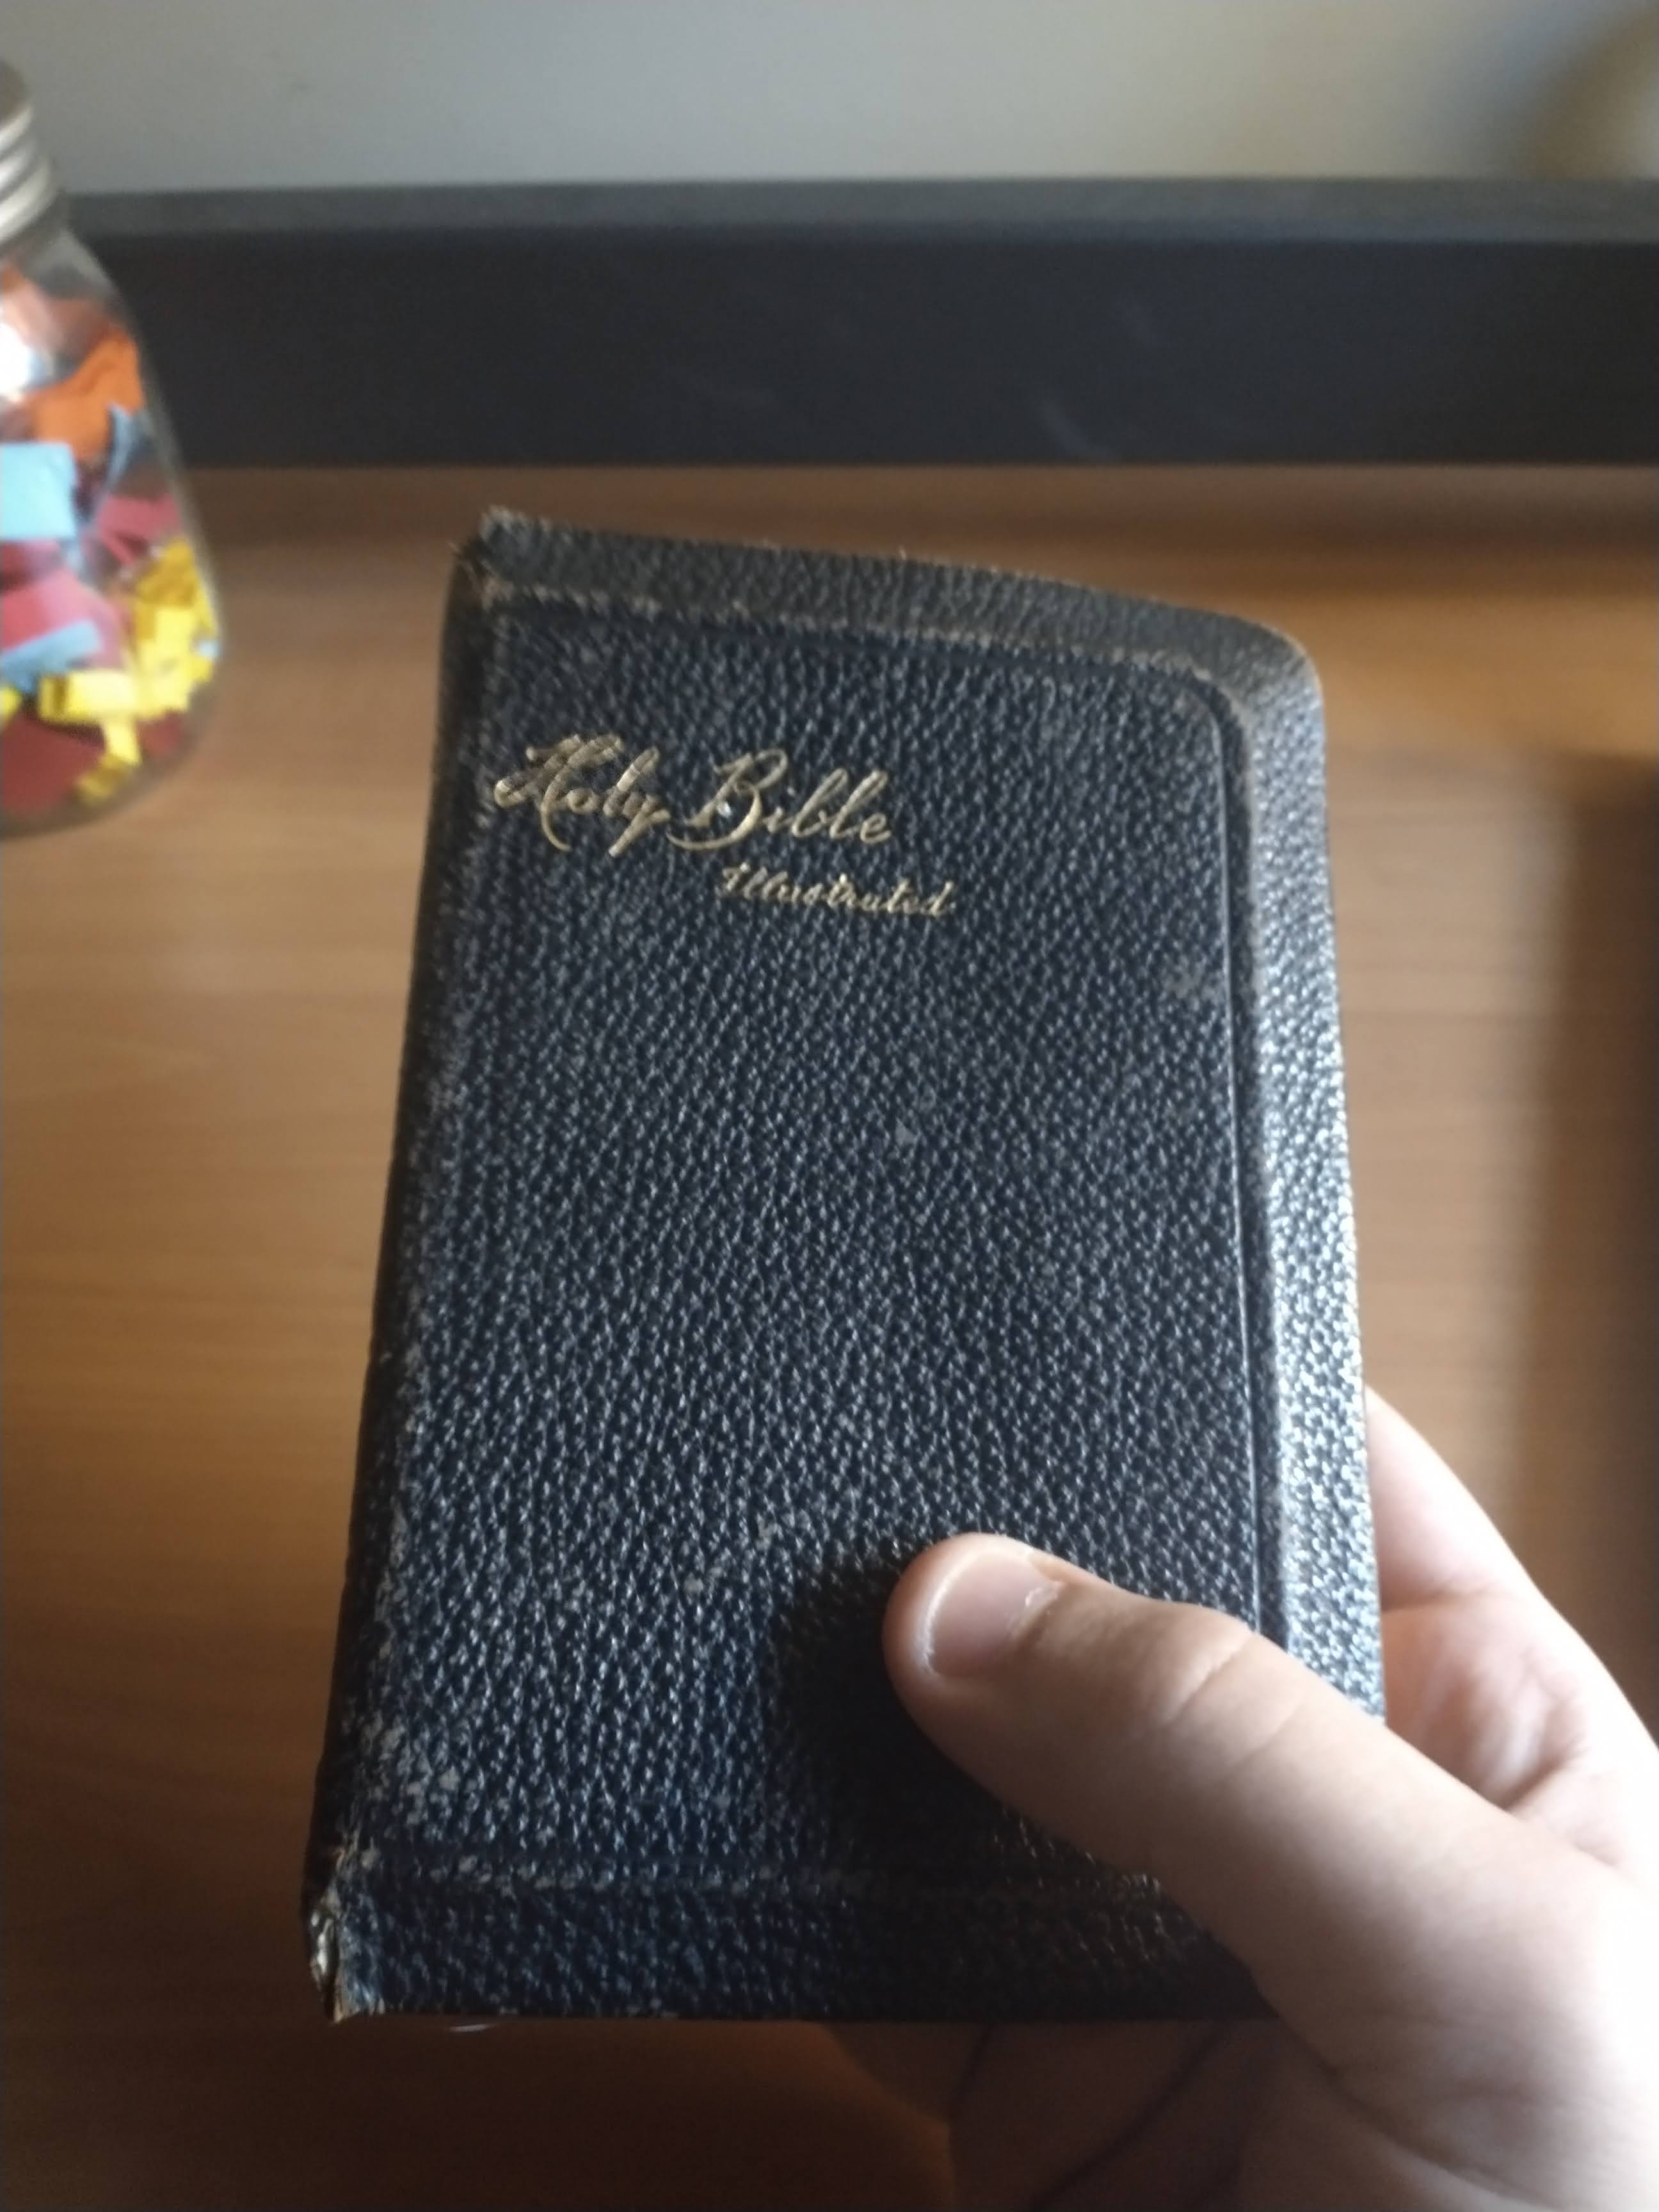 A picture of me holding the Bible in my hand. It is about the height of a smartphone, and maybe a bit wider. It is a beat-up, dirty black leather. At the top of the book, in muted, cursive gold text, it reads, "Holy Bible Illustrated".